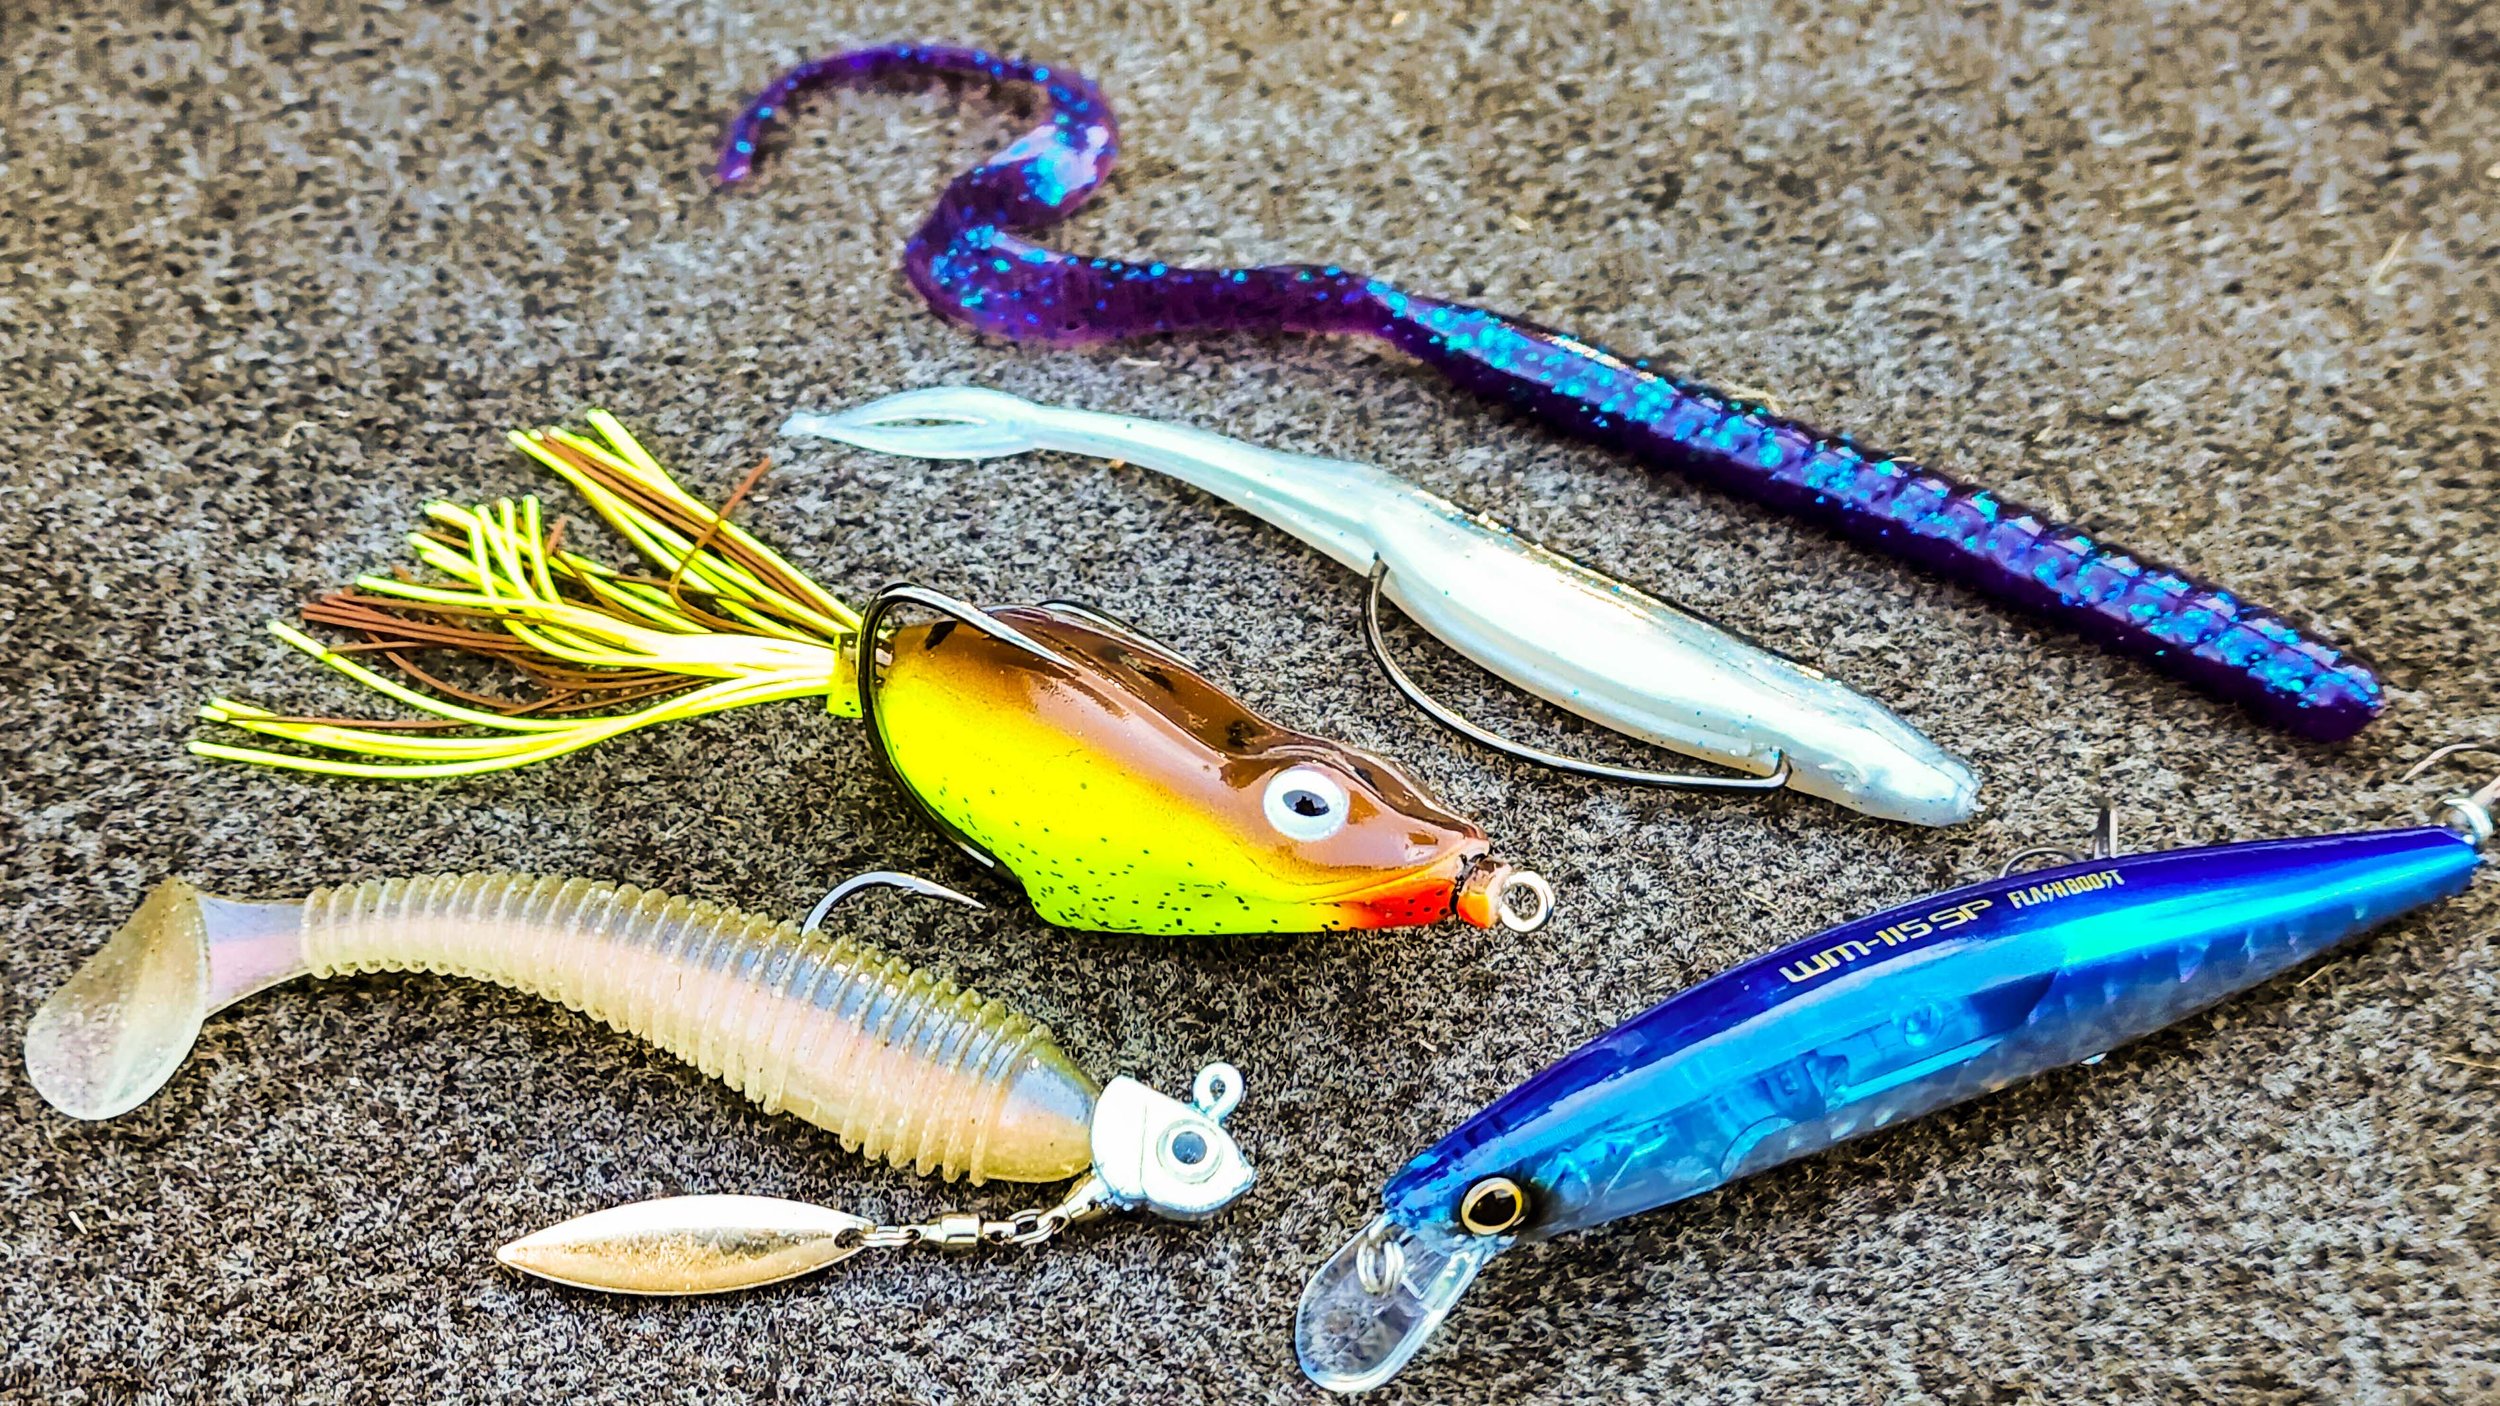 Top 5 Baits For August Bass Fishing! — Tactical Bassin' - Bass